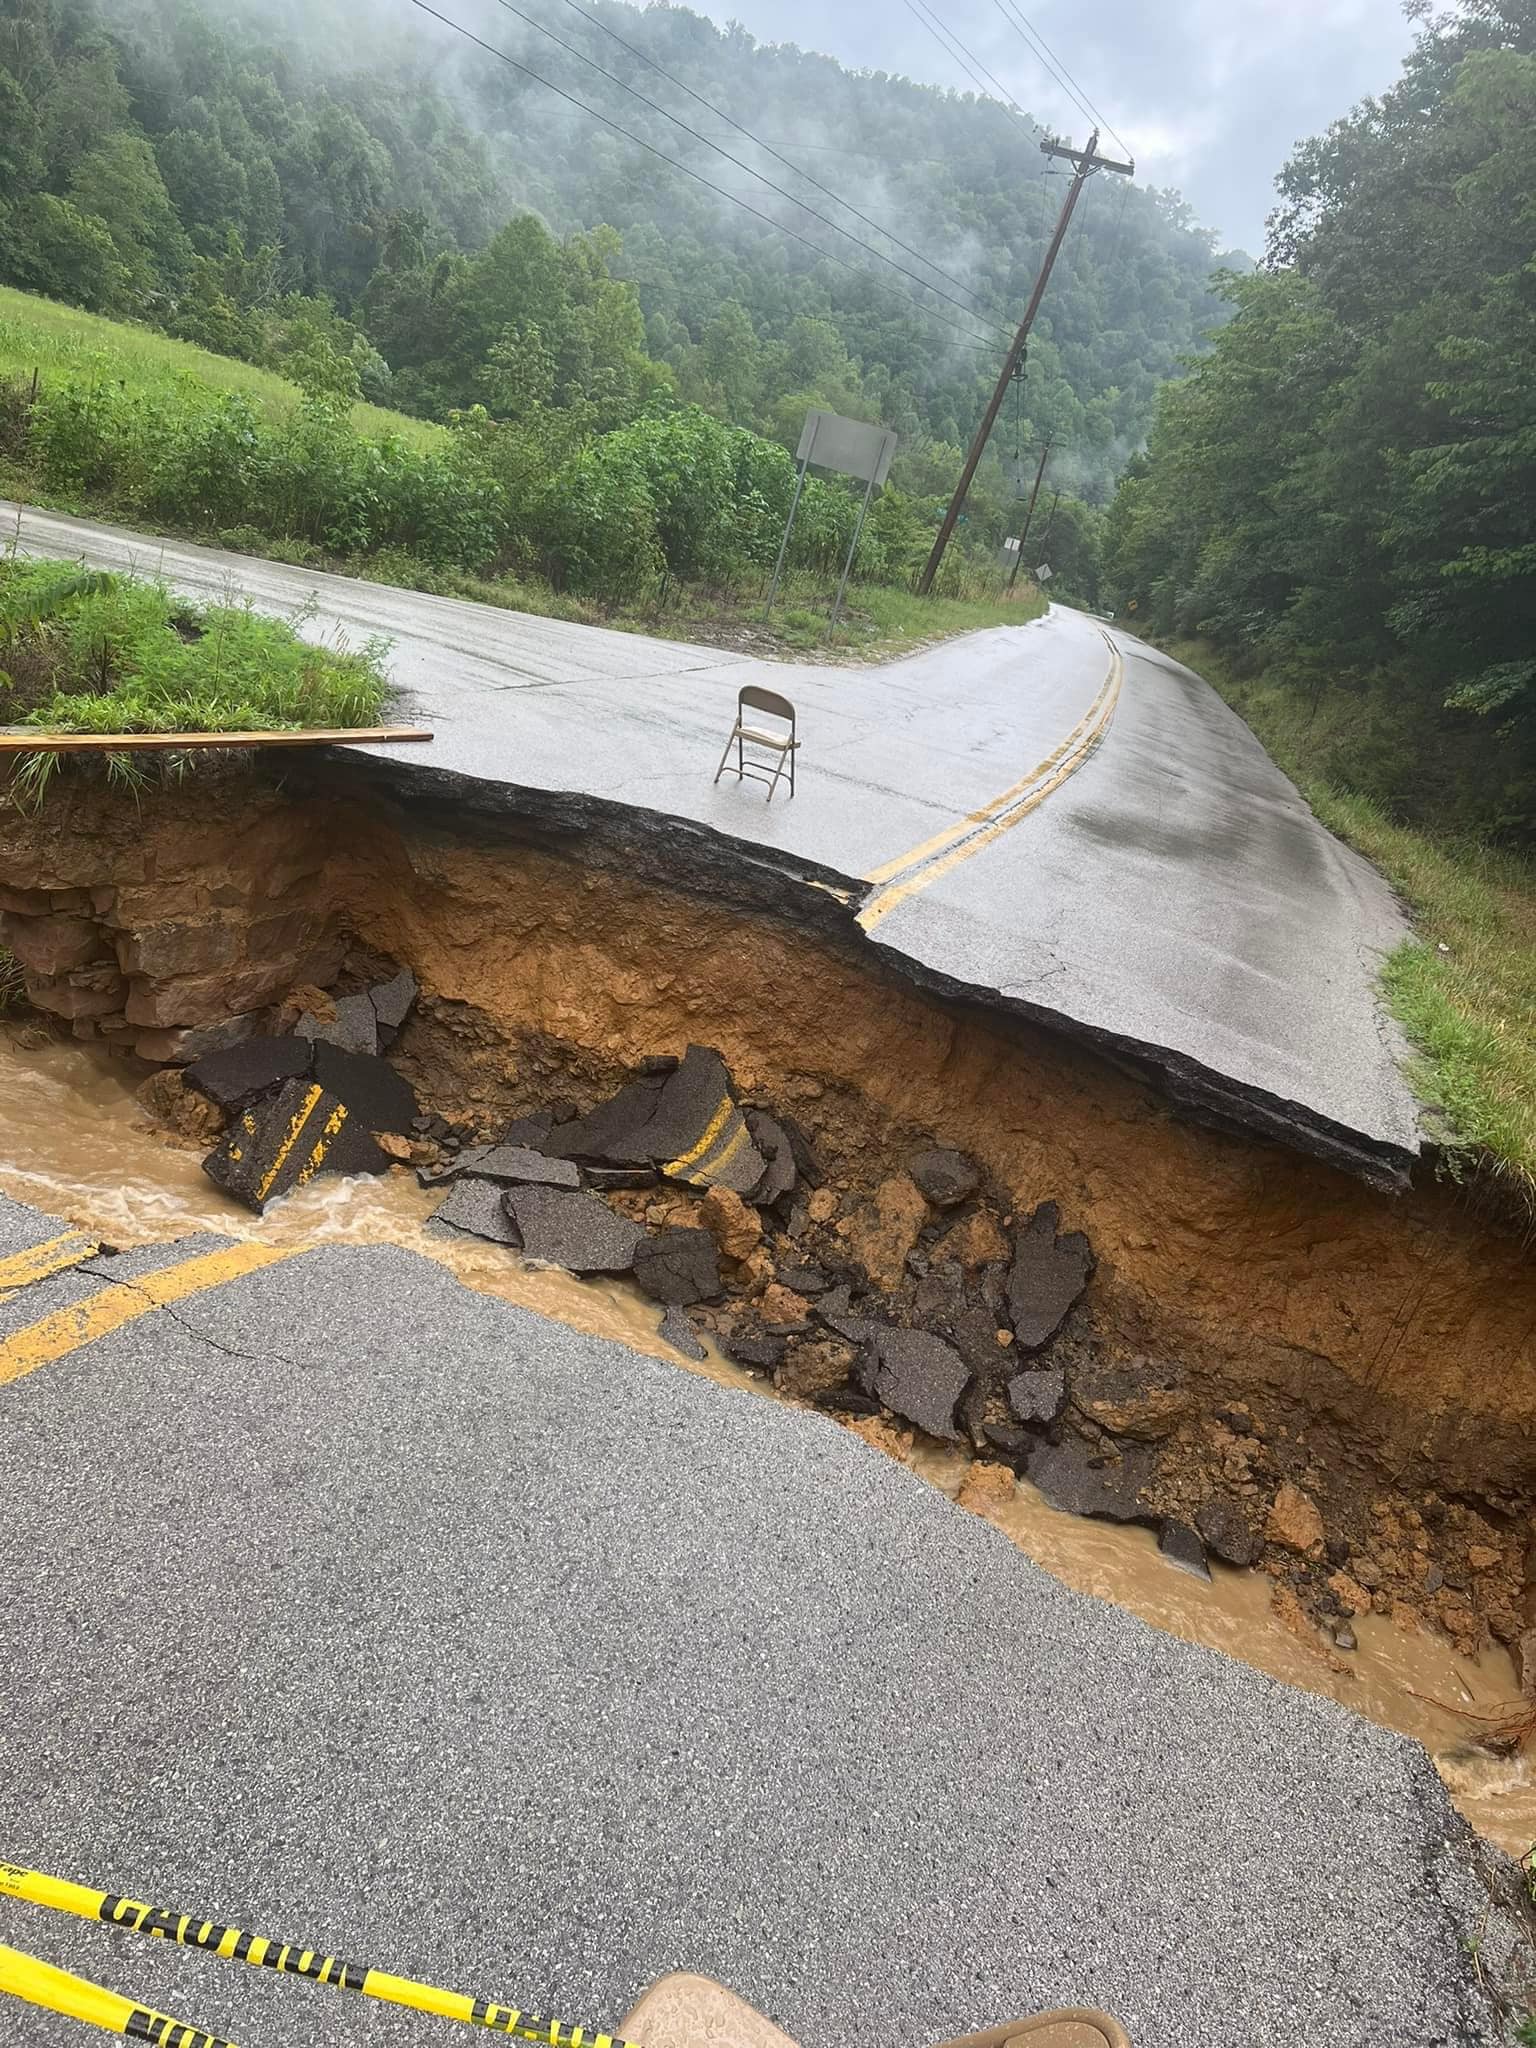 Panco Creek in Clay County, KY washed a road away due to flash flooding